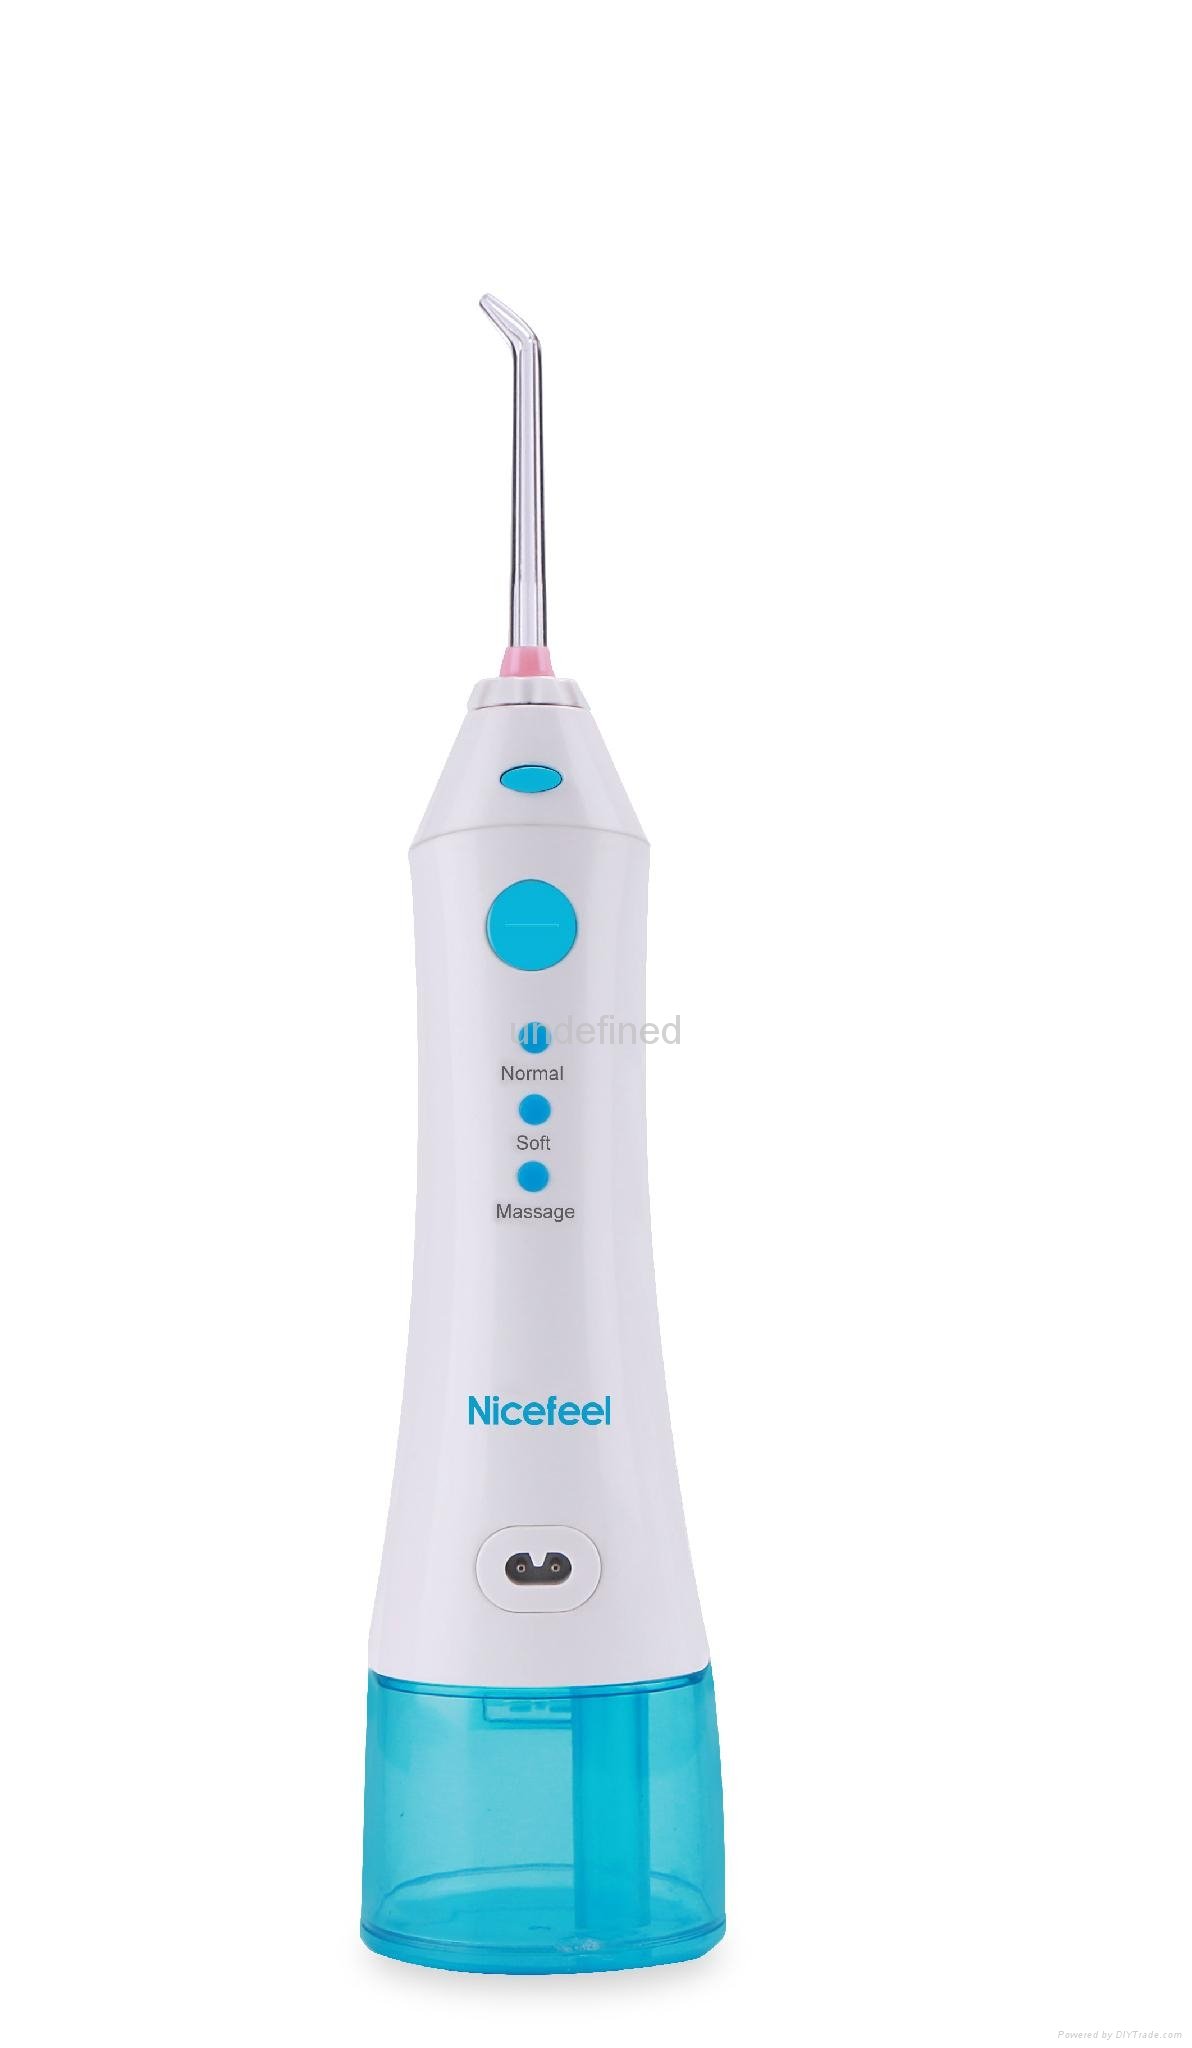 Nicefeel German designelectric tooth brush by manufactery 4